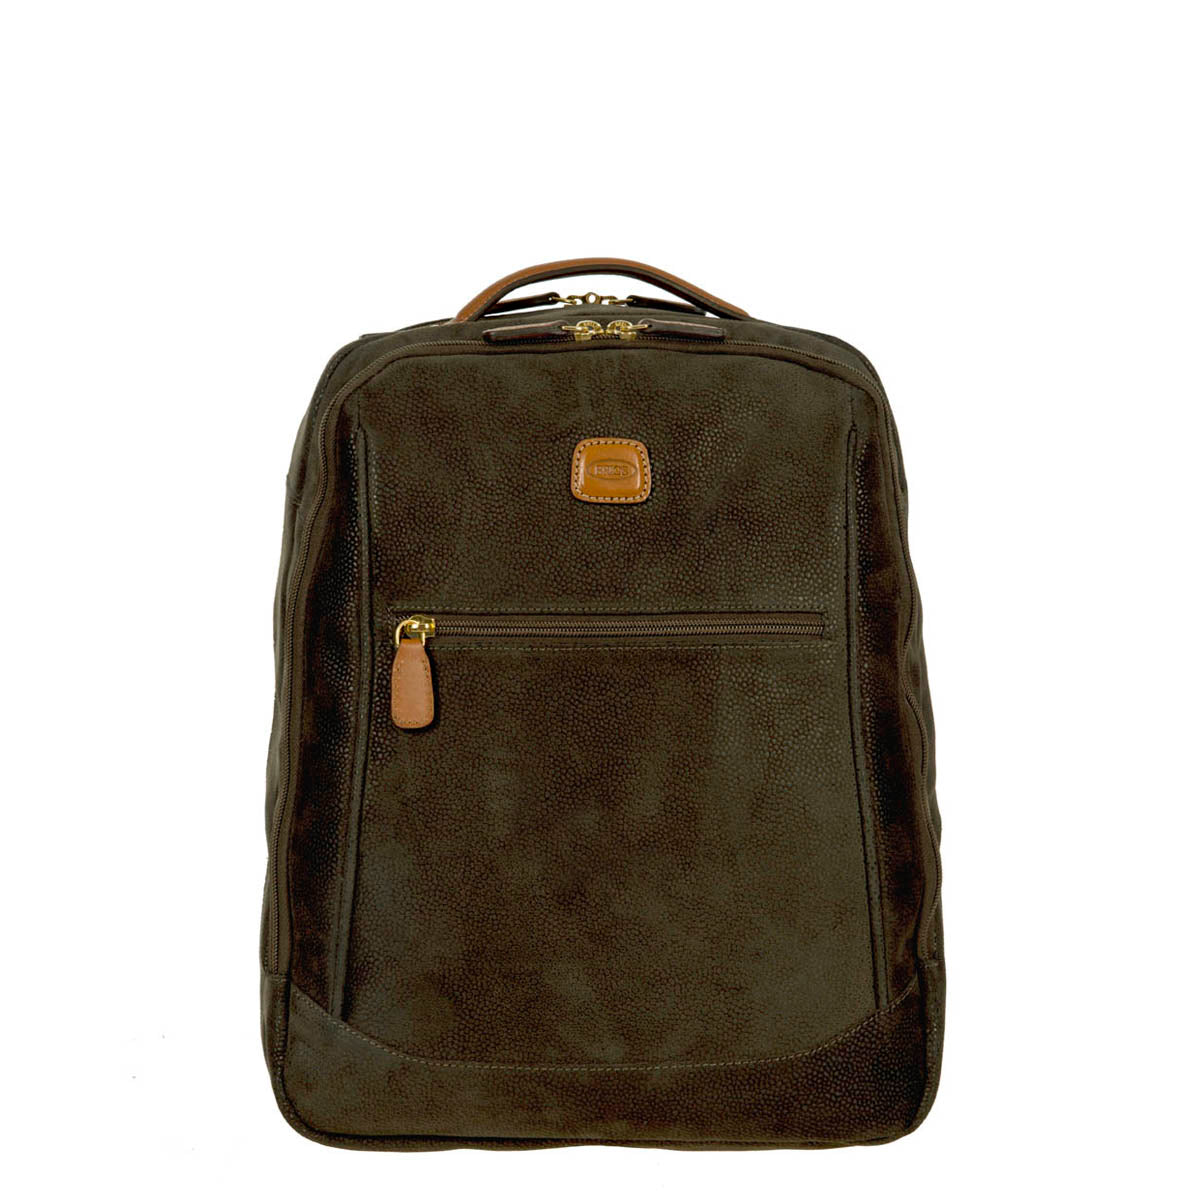 Bric's Life Backpack - Olive